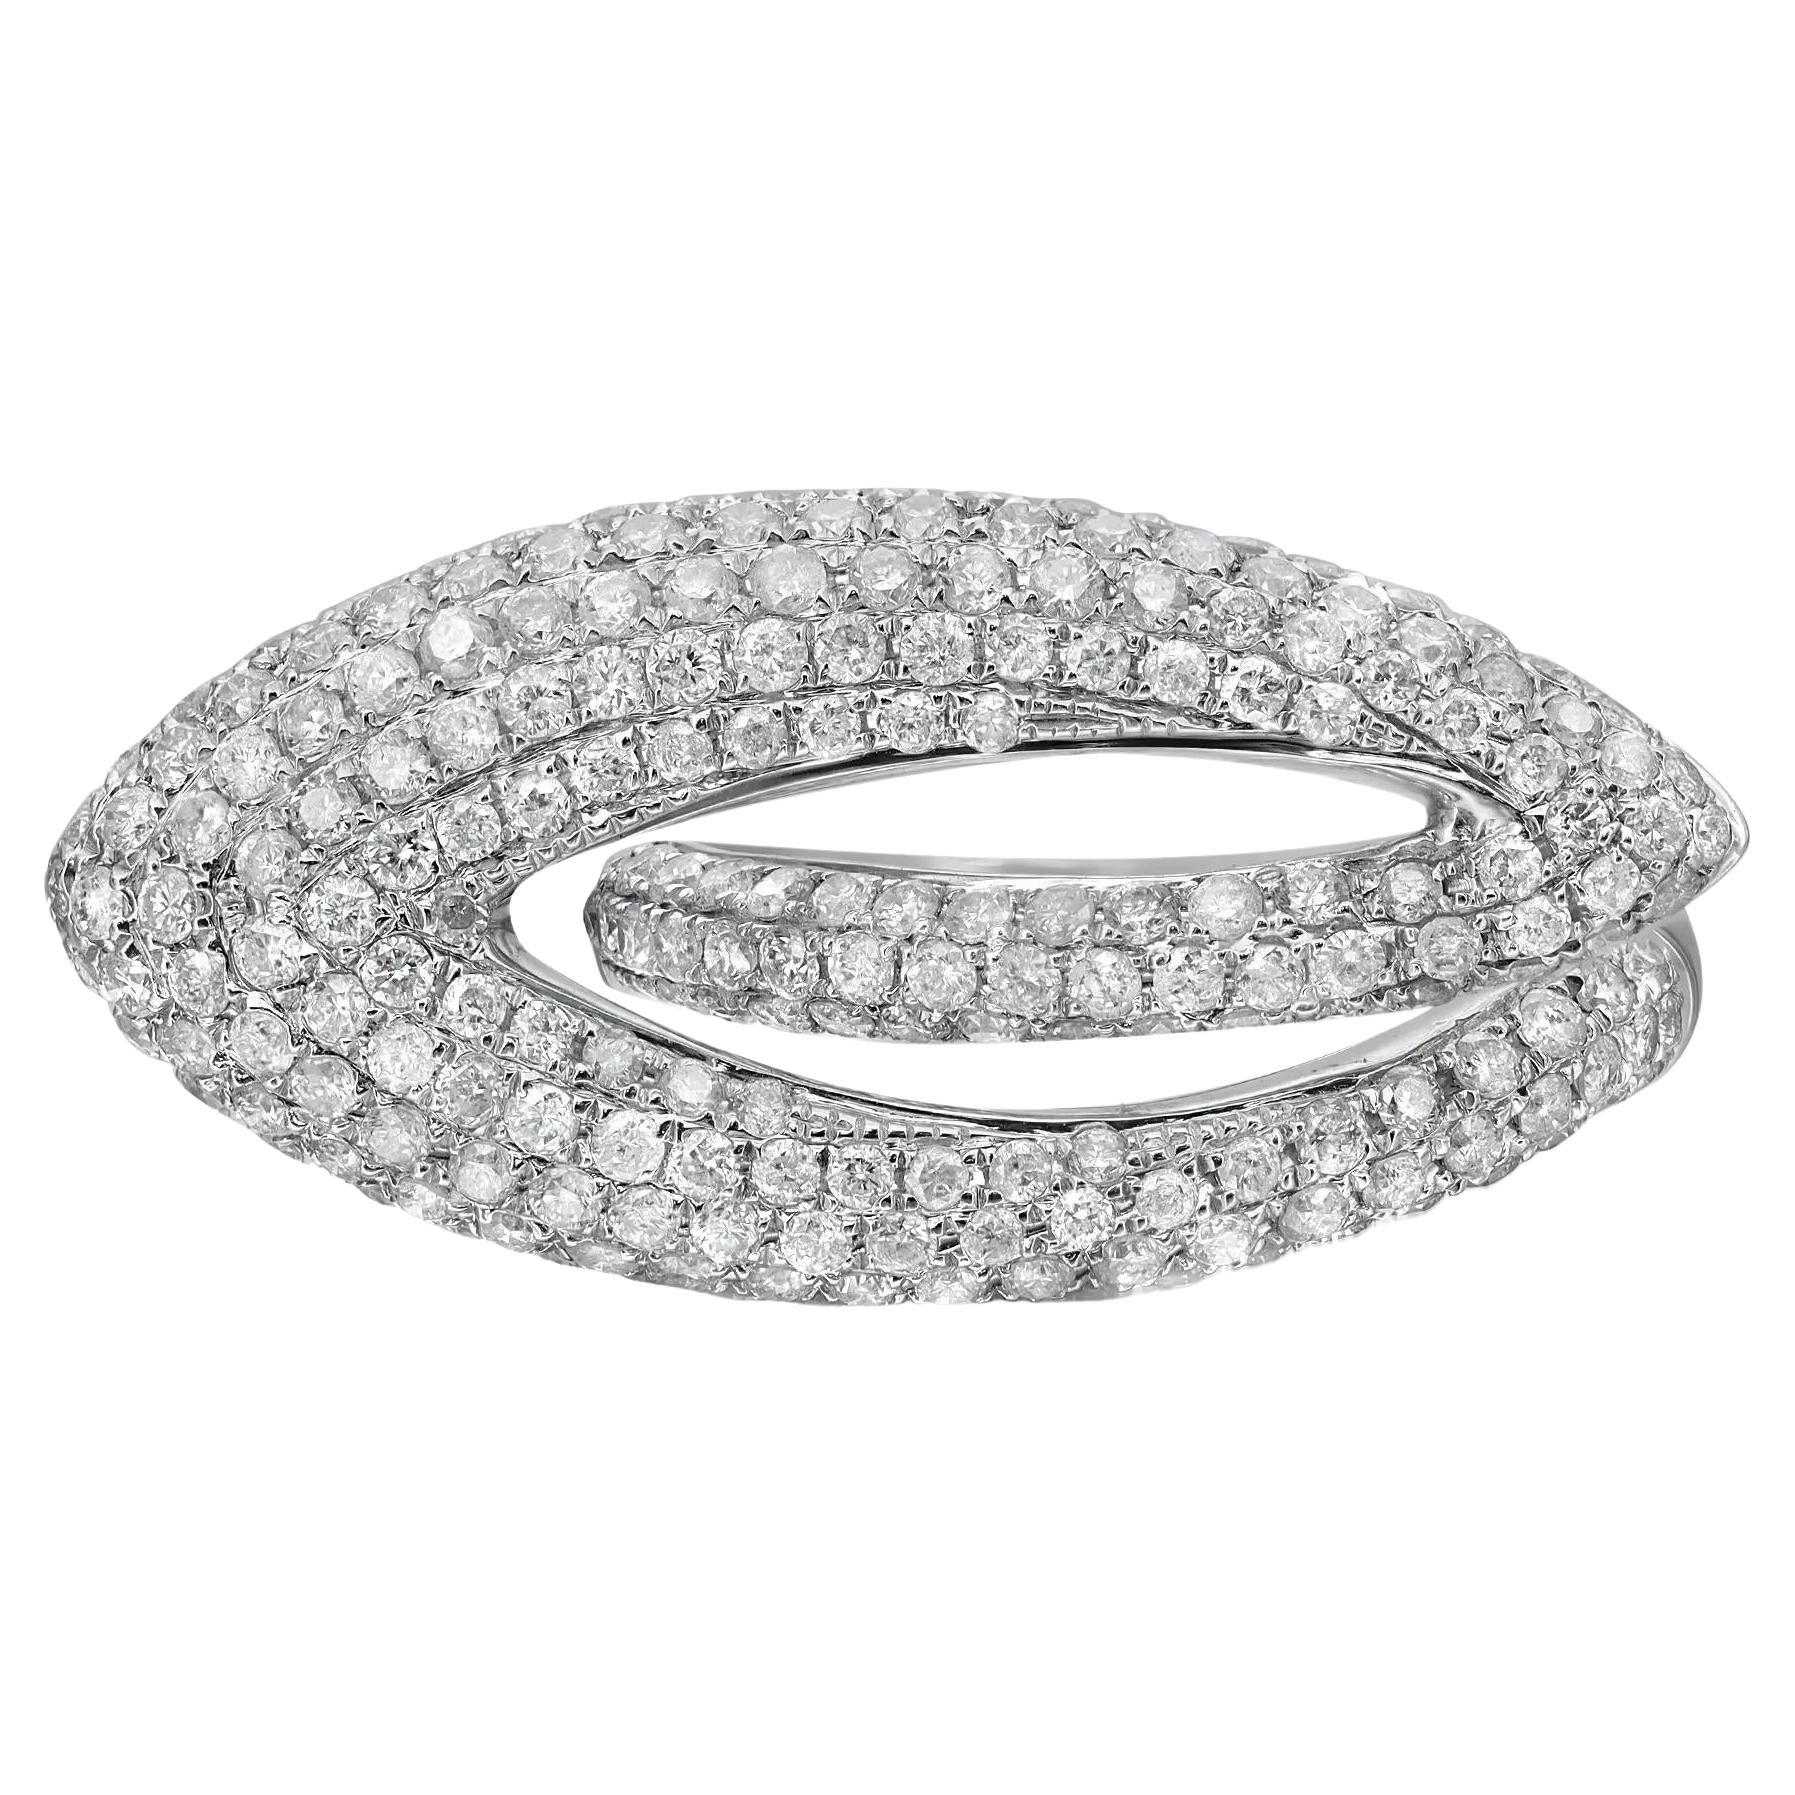 2.26cttw Pave Set Round Diamond Ladies Cocktail Ring 14k White Gold For Sale